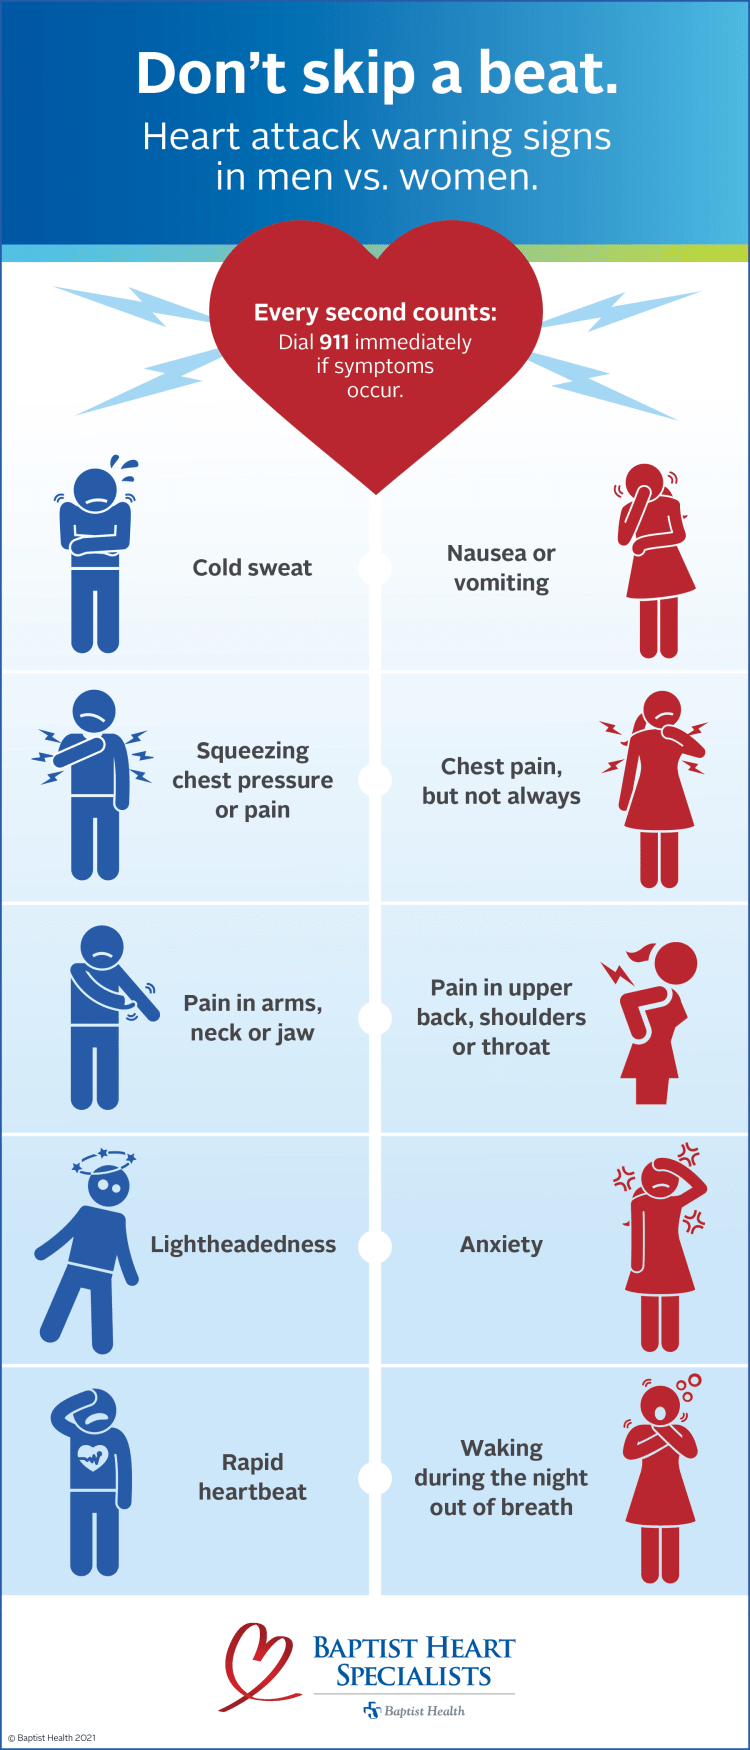 infographic showing heart attack warning signs in men vs. women